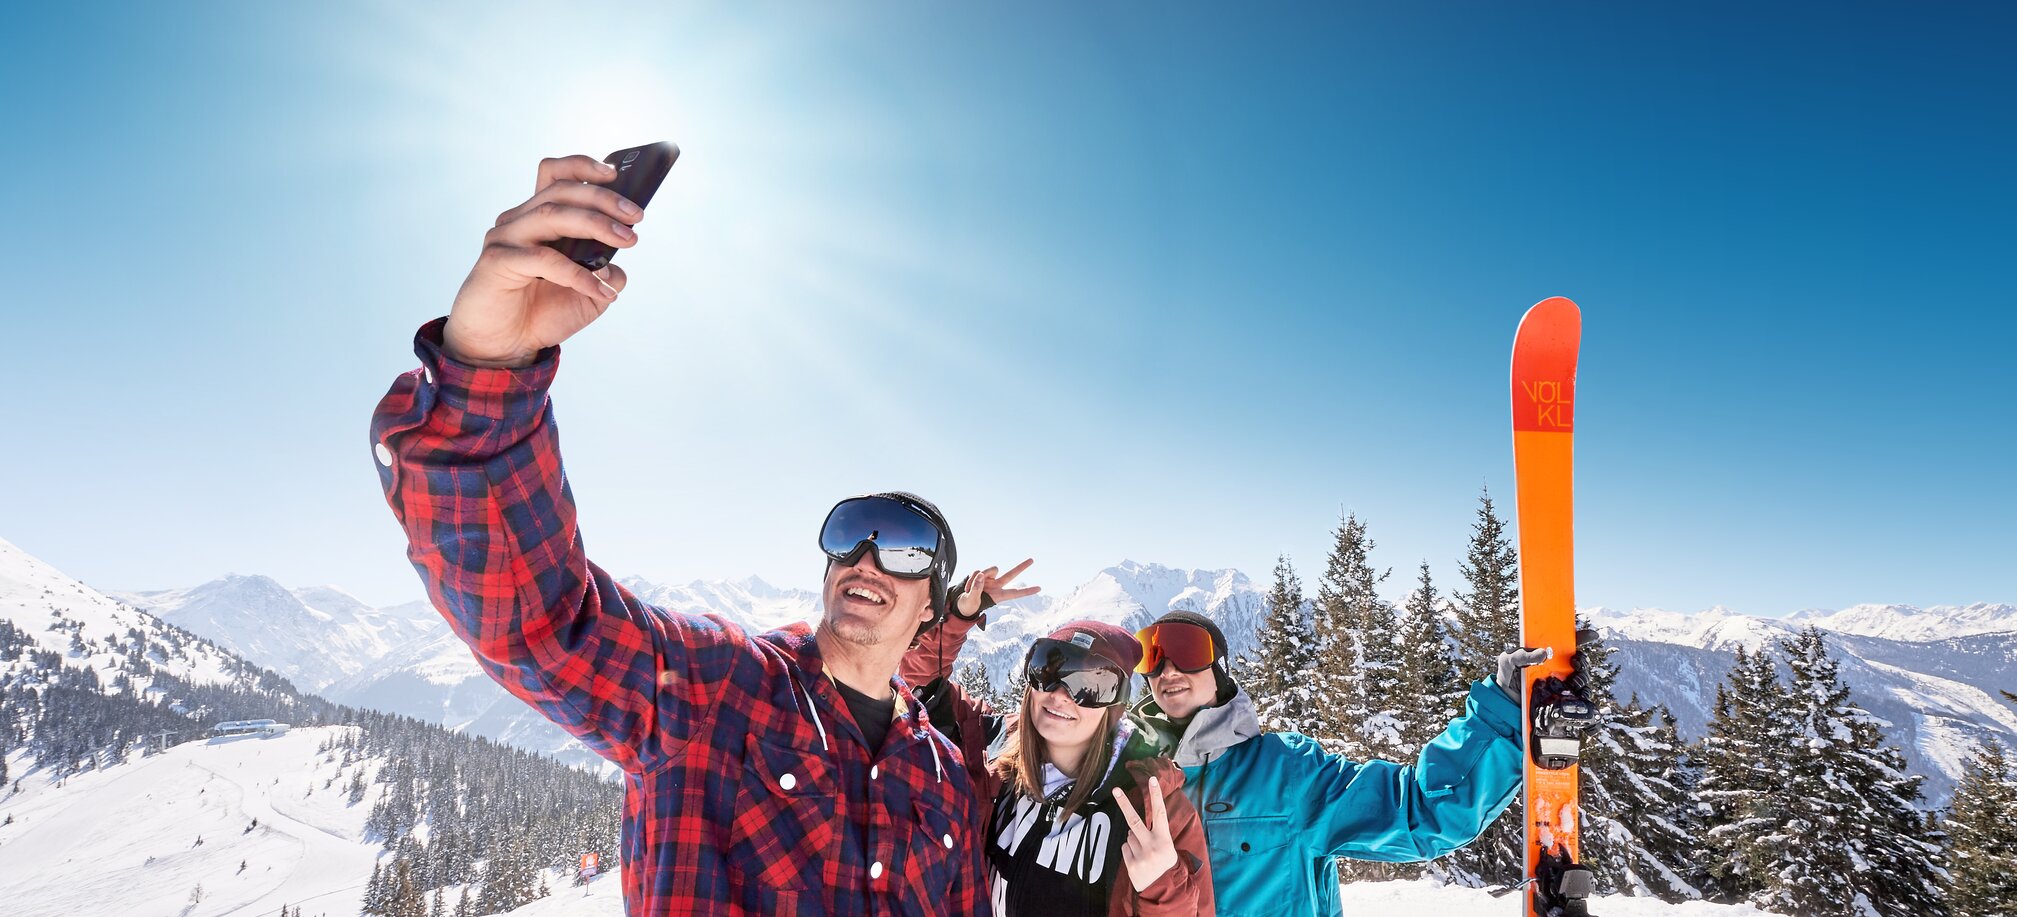 Three teenagers in ski goggles take a selfie on the snow-covered mountain and the one in the back holds an orange ski